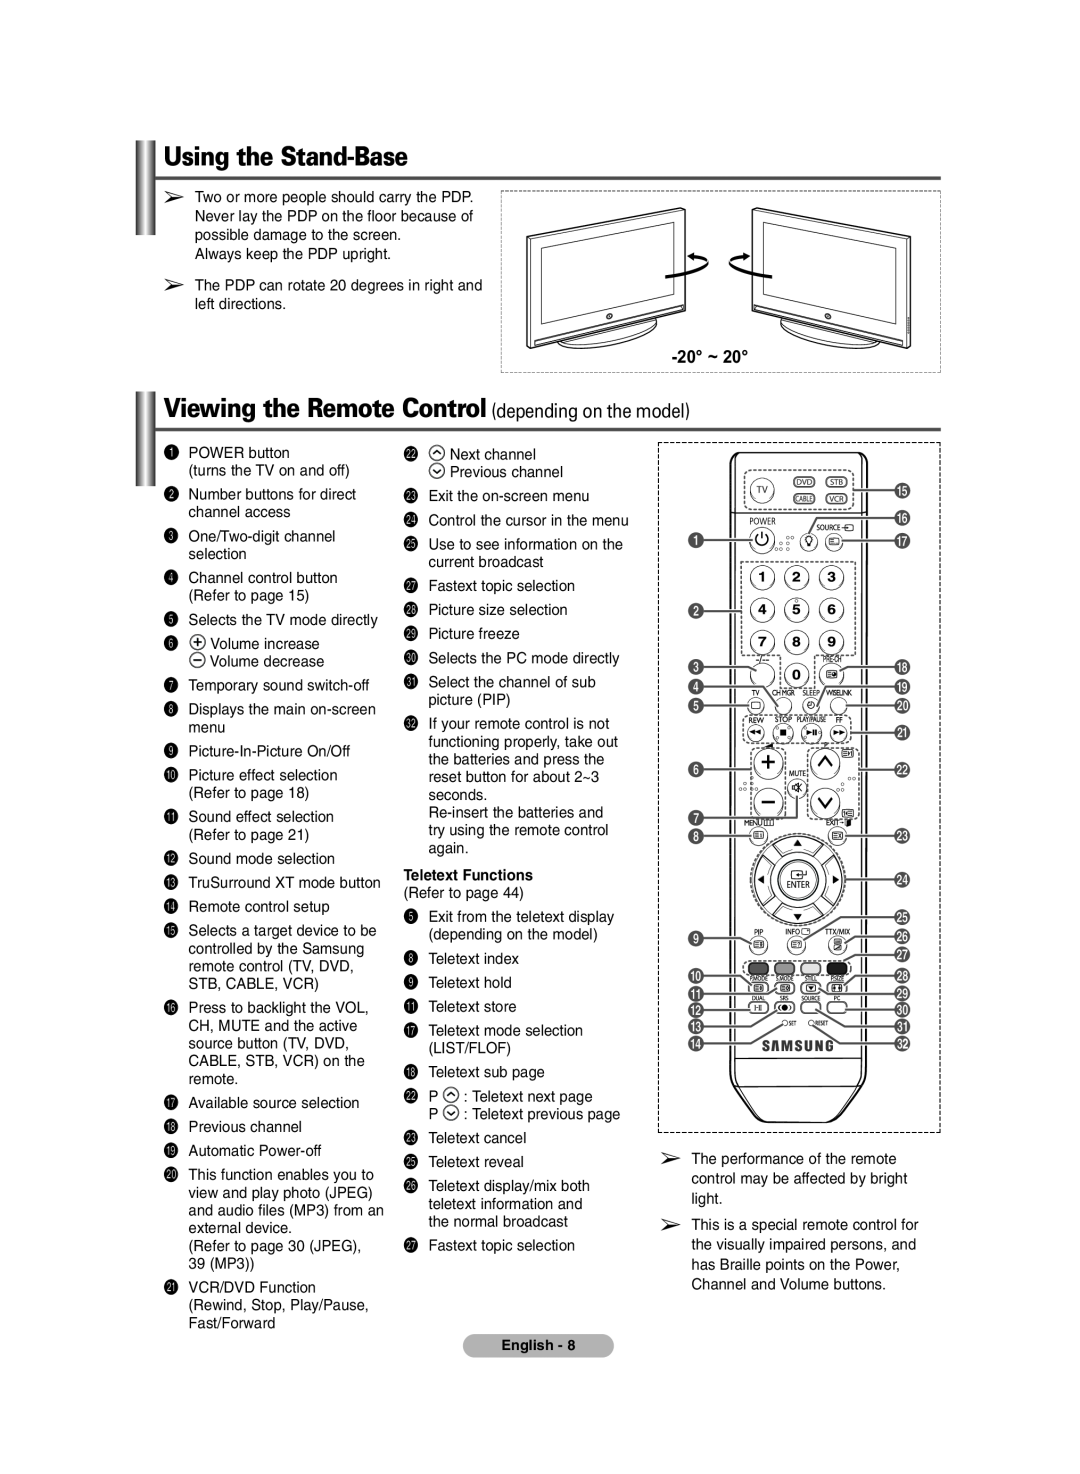 Samsung PDP-TELEVISION manual Using the Stand-Base, Viewing the Remote Control depending on the model, 20 ~ 